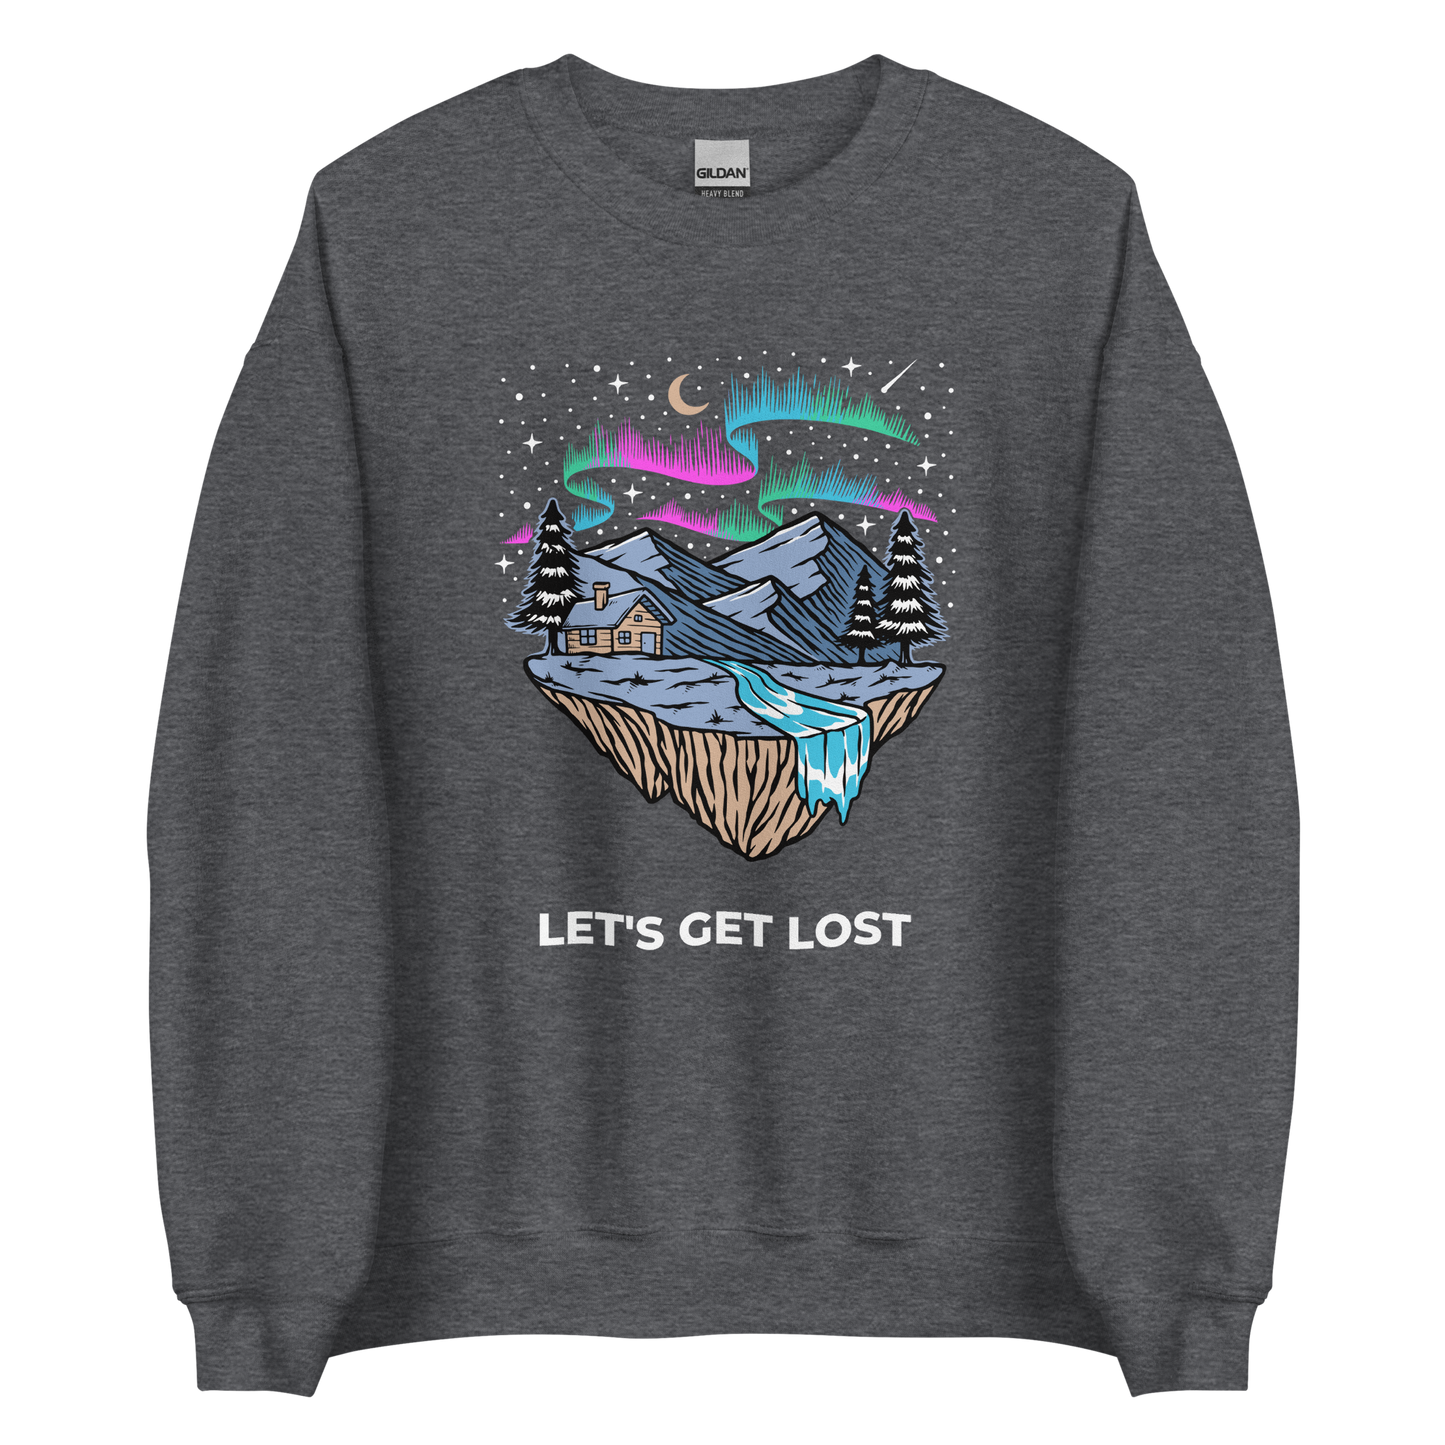 Dark Heather Let's Get Lost Sweatshirt featuring a mesmerizing night sky, adorned with stars and aurora borealis graphic on the chest - Cool Graphic Northern Lights Sweatshirts - Boozy Fox